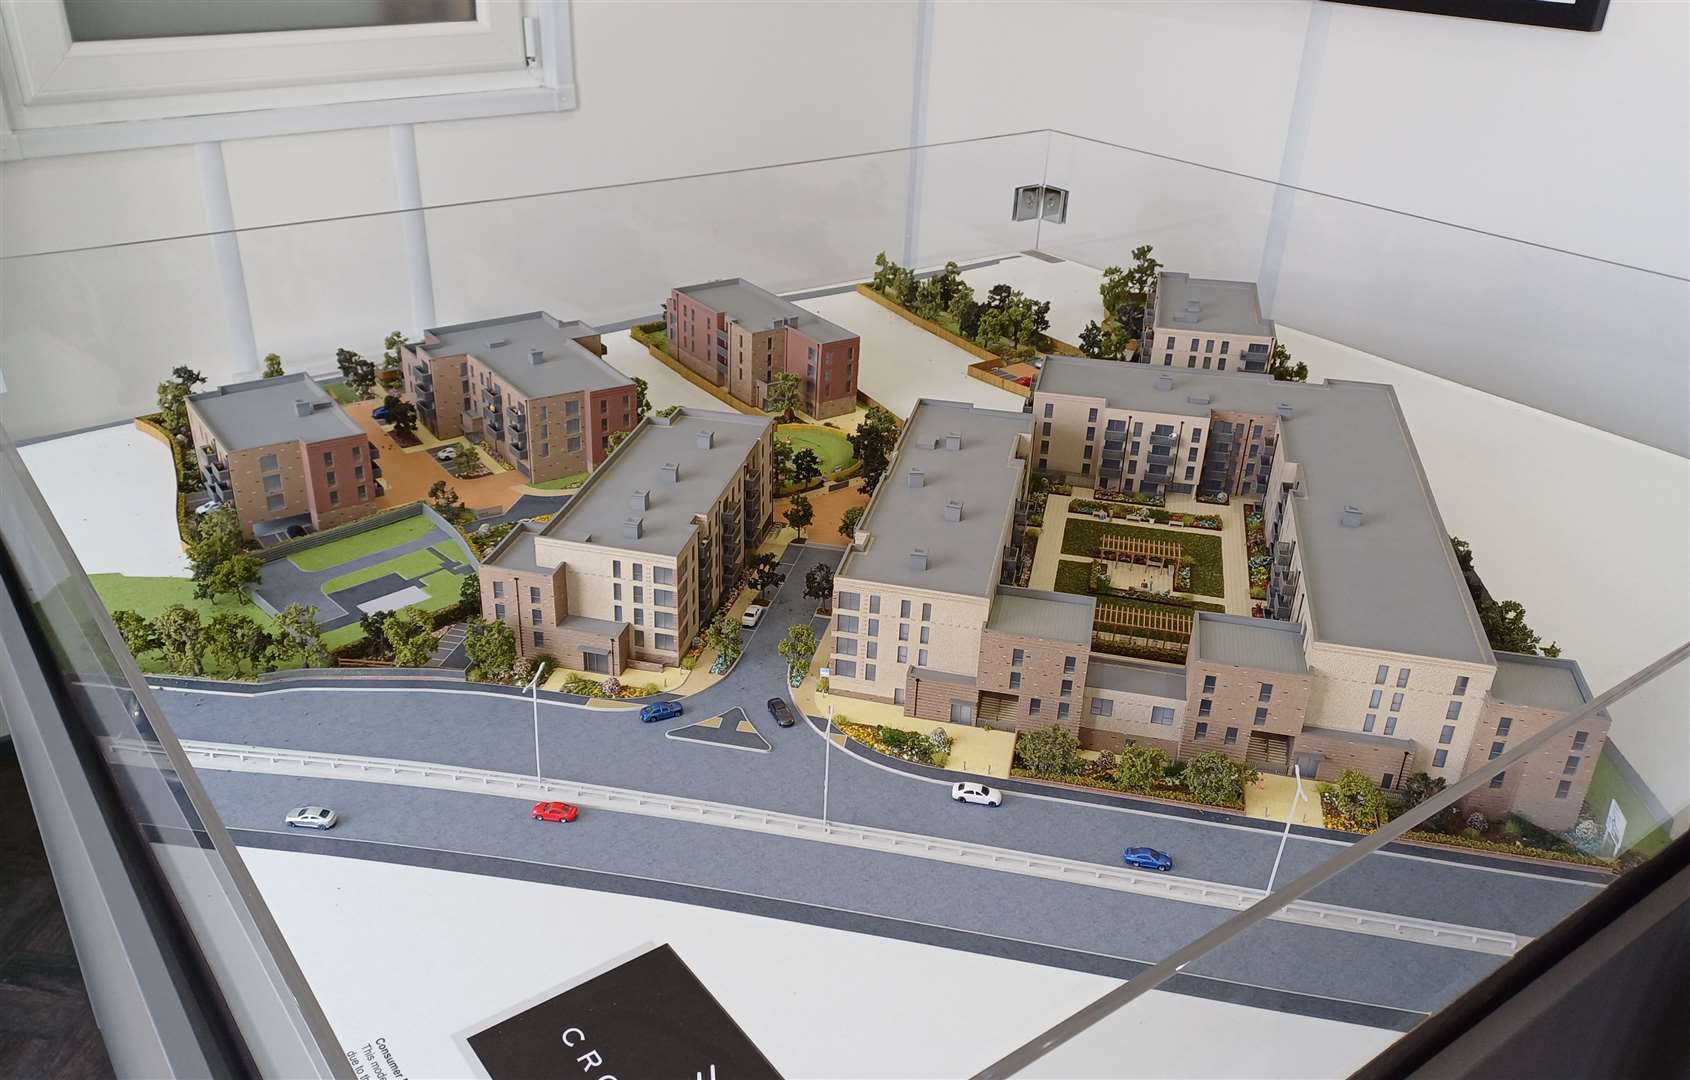 display figure of what the Crossway Quarter development would eventually look like